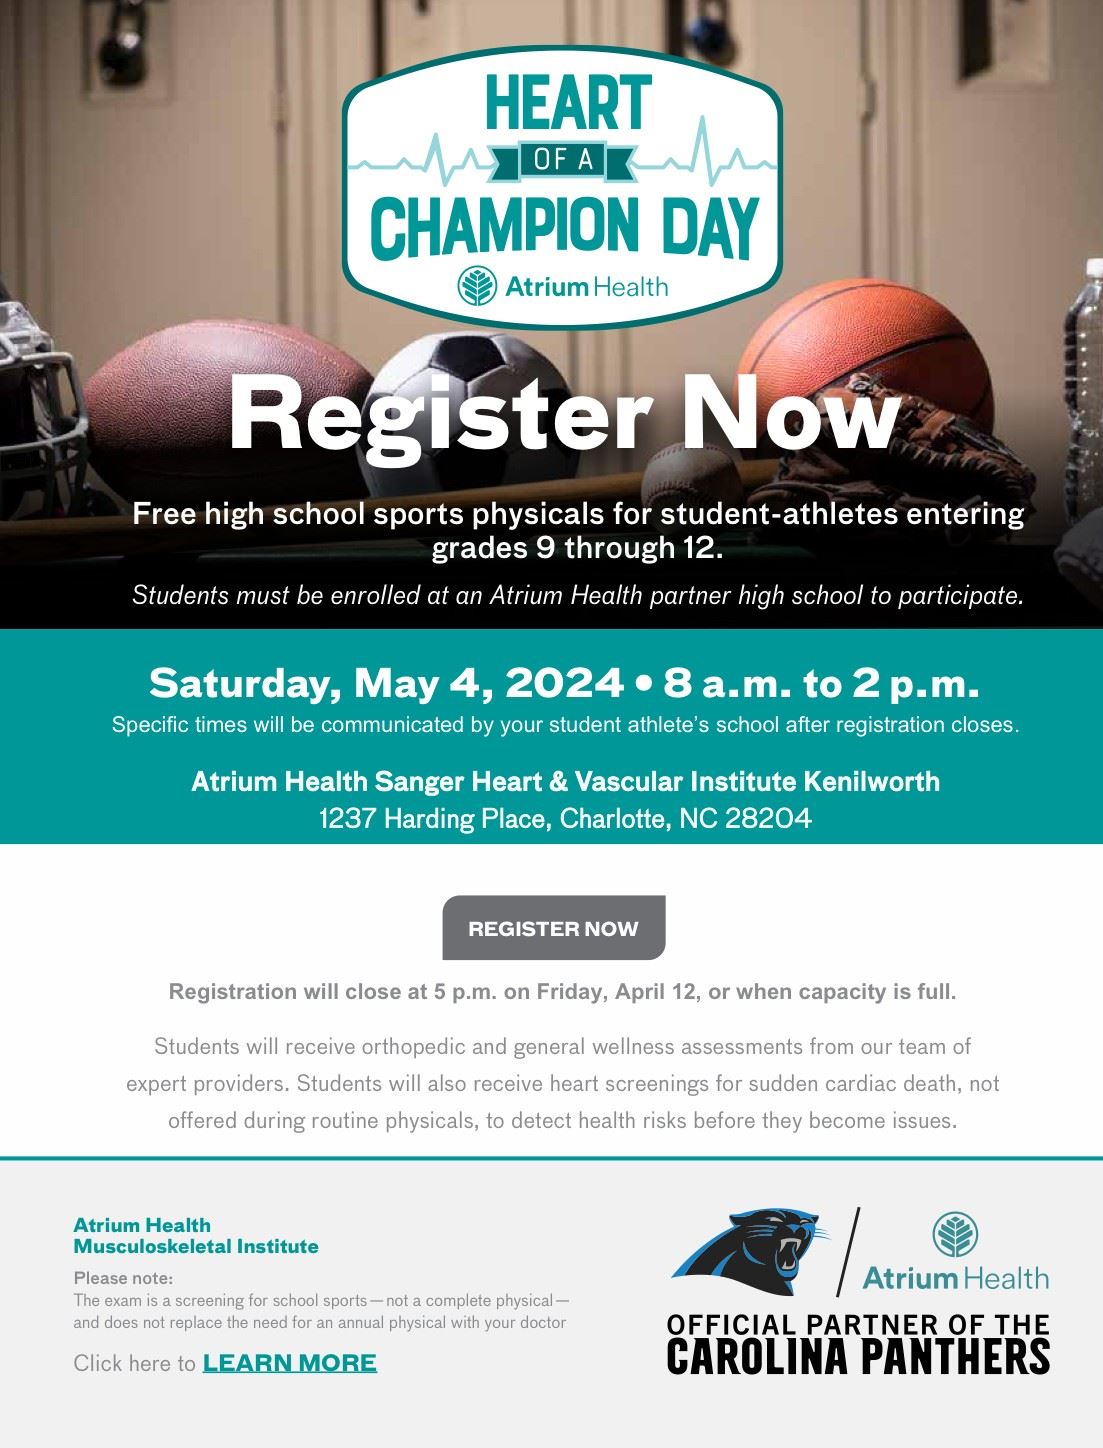  heart of a champion day will be held on saturday may 4th from 8:00am-2:00pm register today